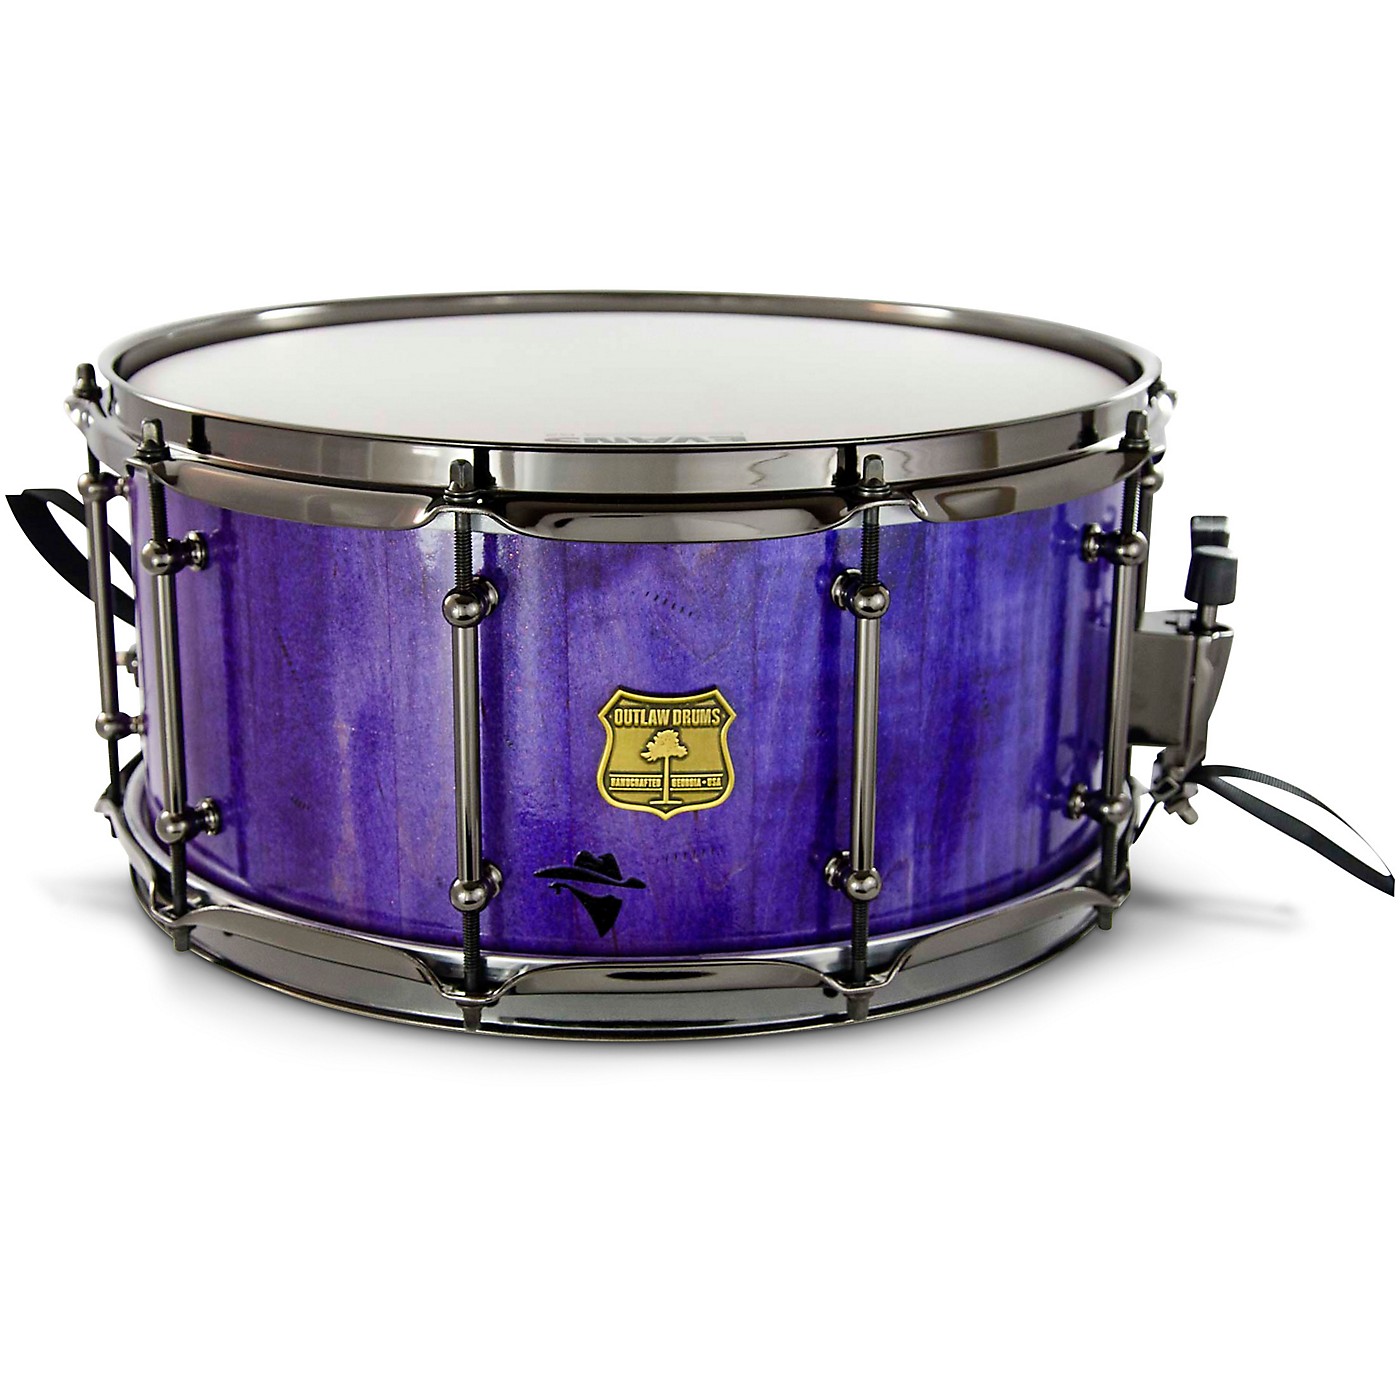 OUTLAW DRUMS Bandit Series Snare Drum With Black Hardware thumbnail